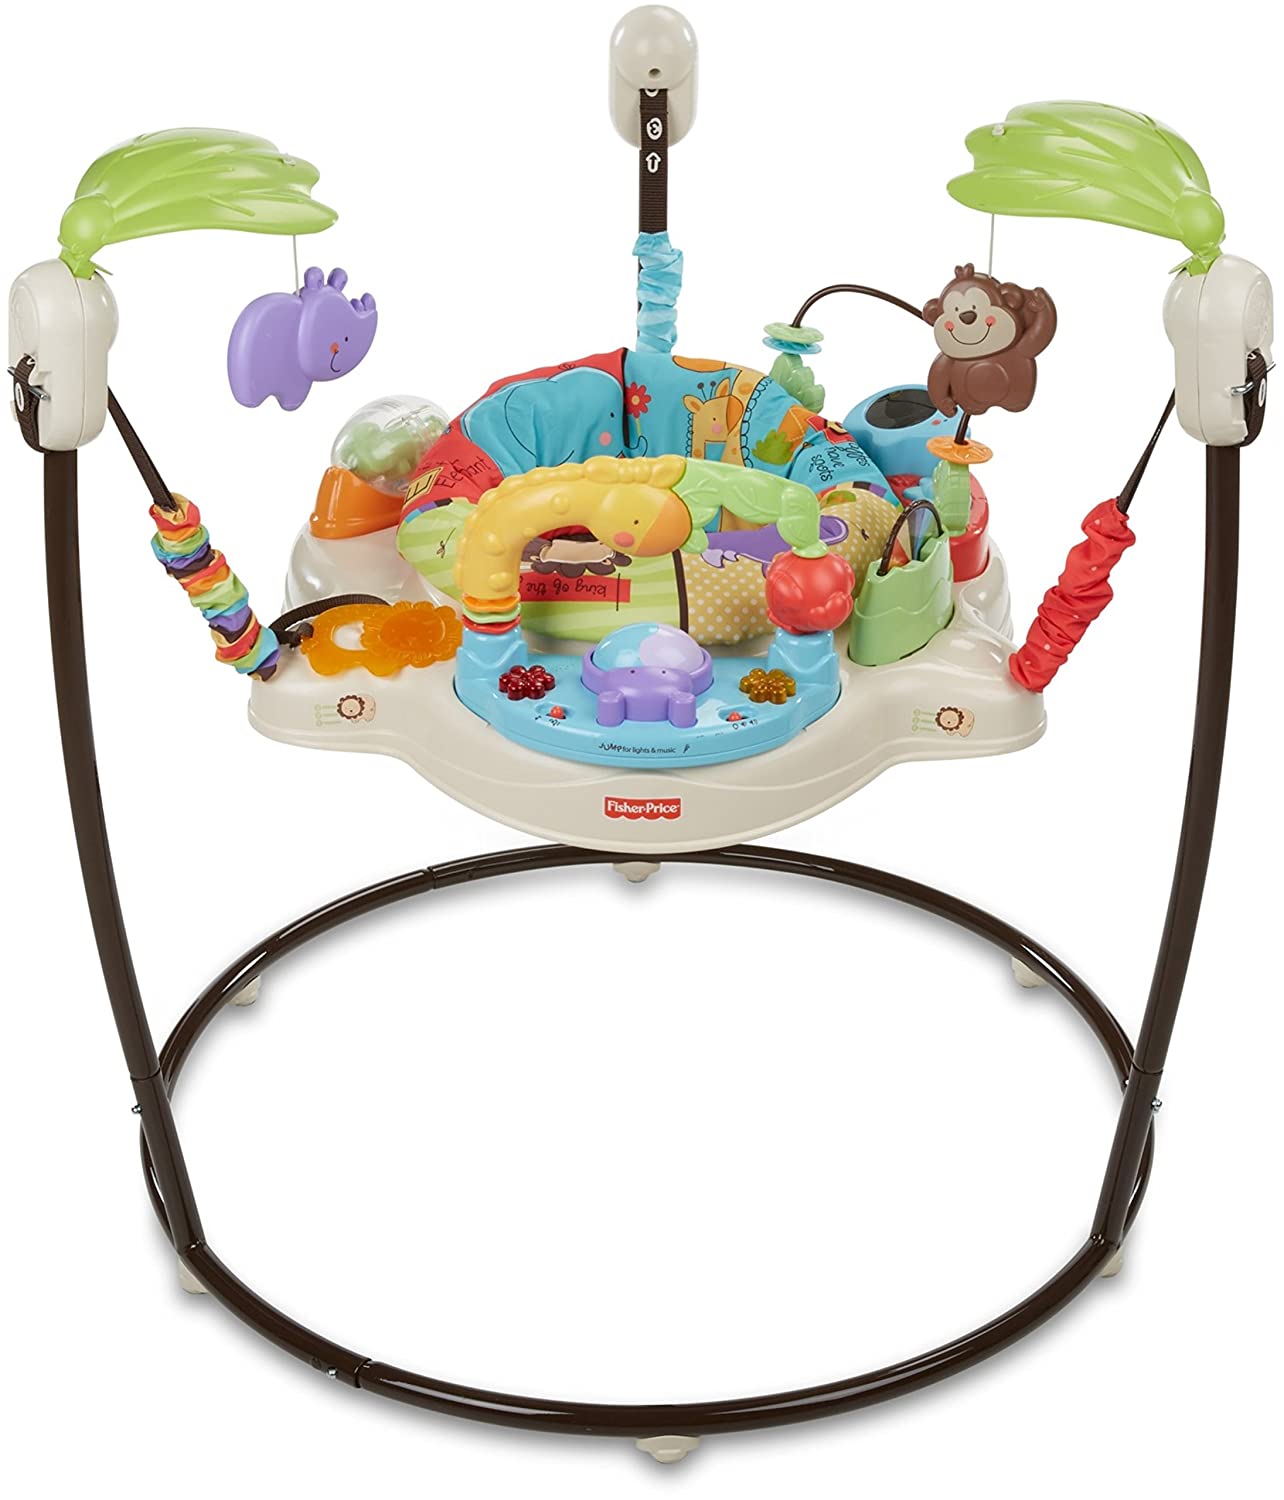 7 Best Fisher Price Jumperoo Reviews in 2022 3